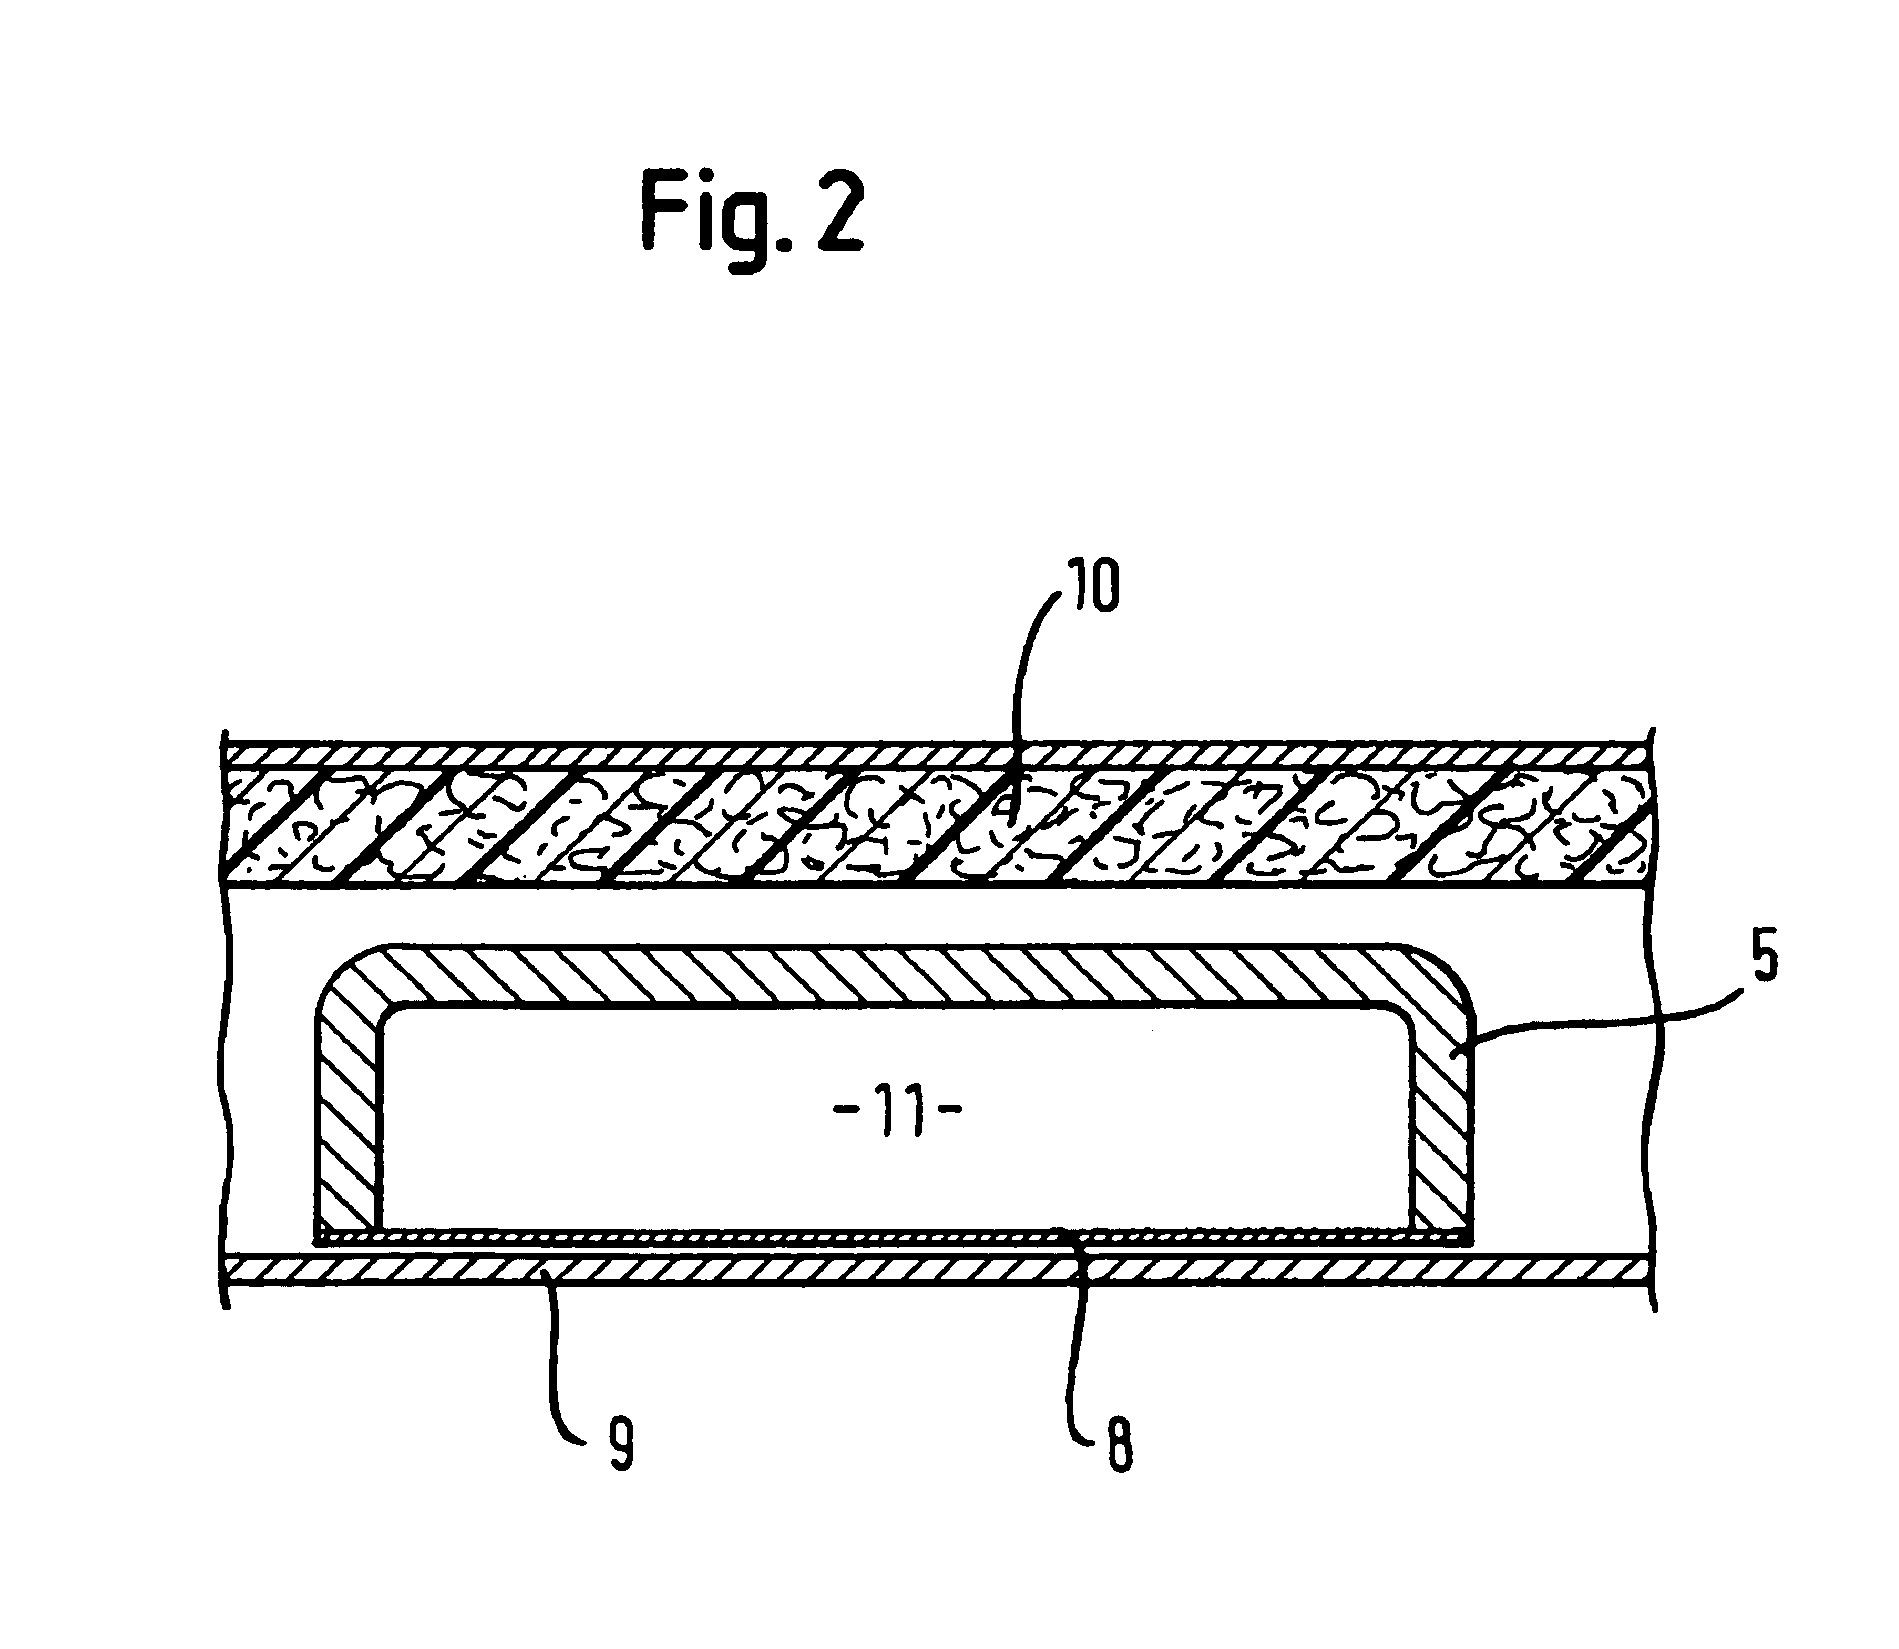 Dishwasher comprising a drying apparatus